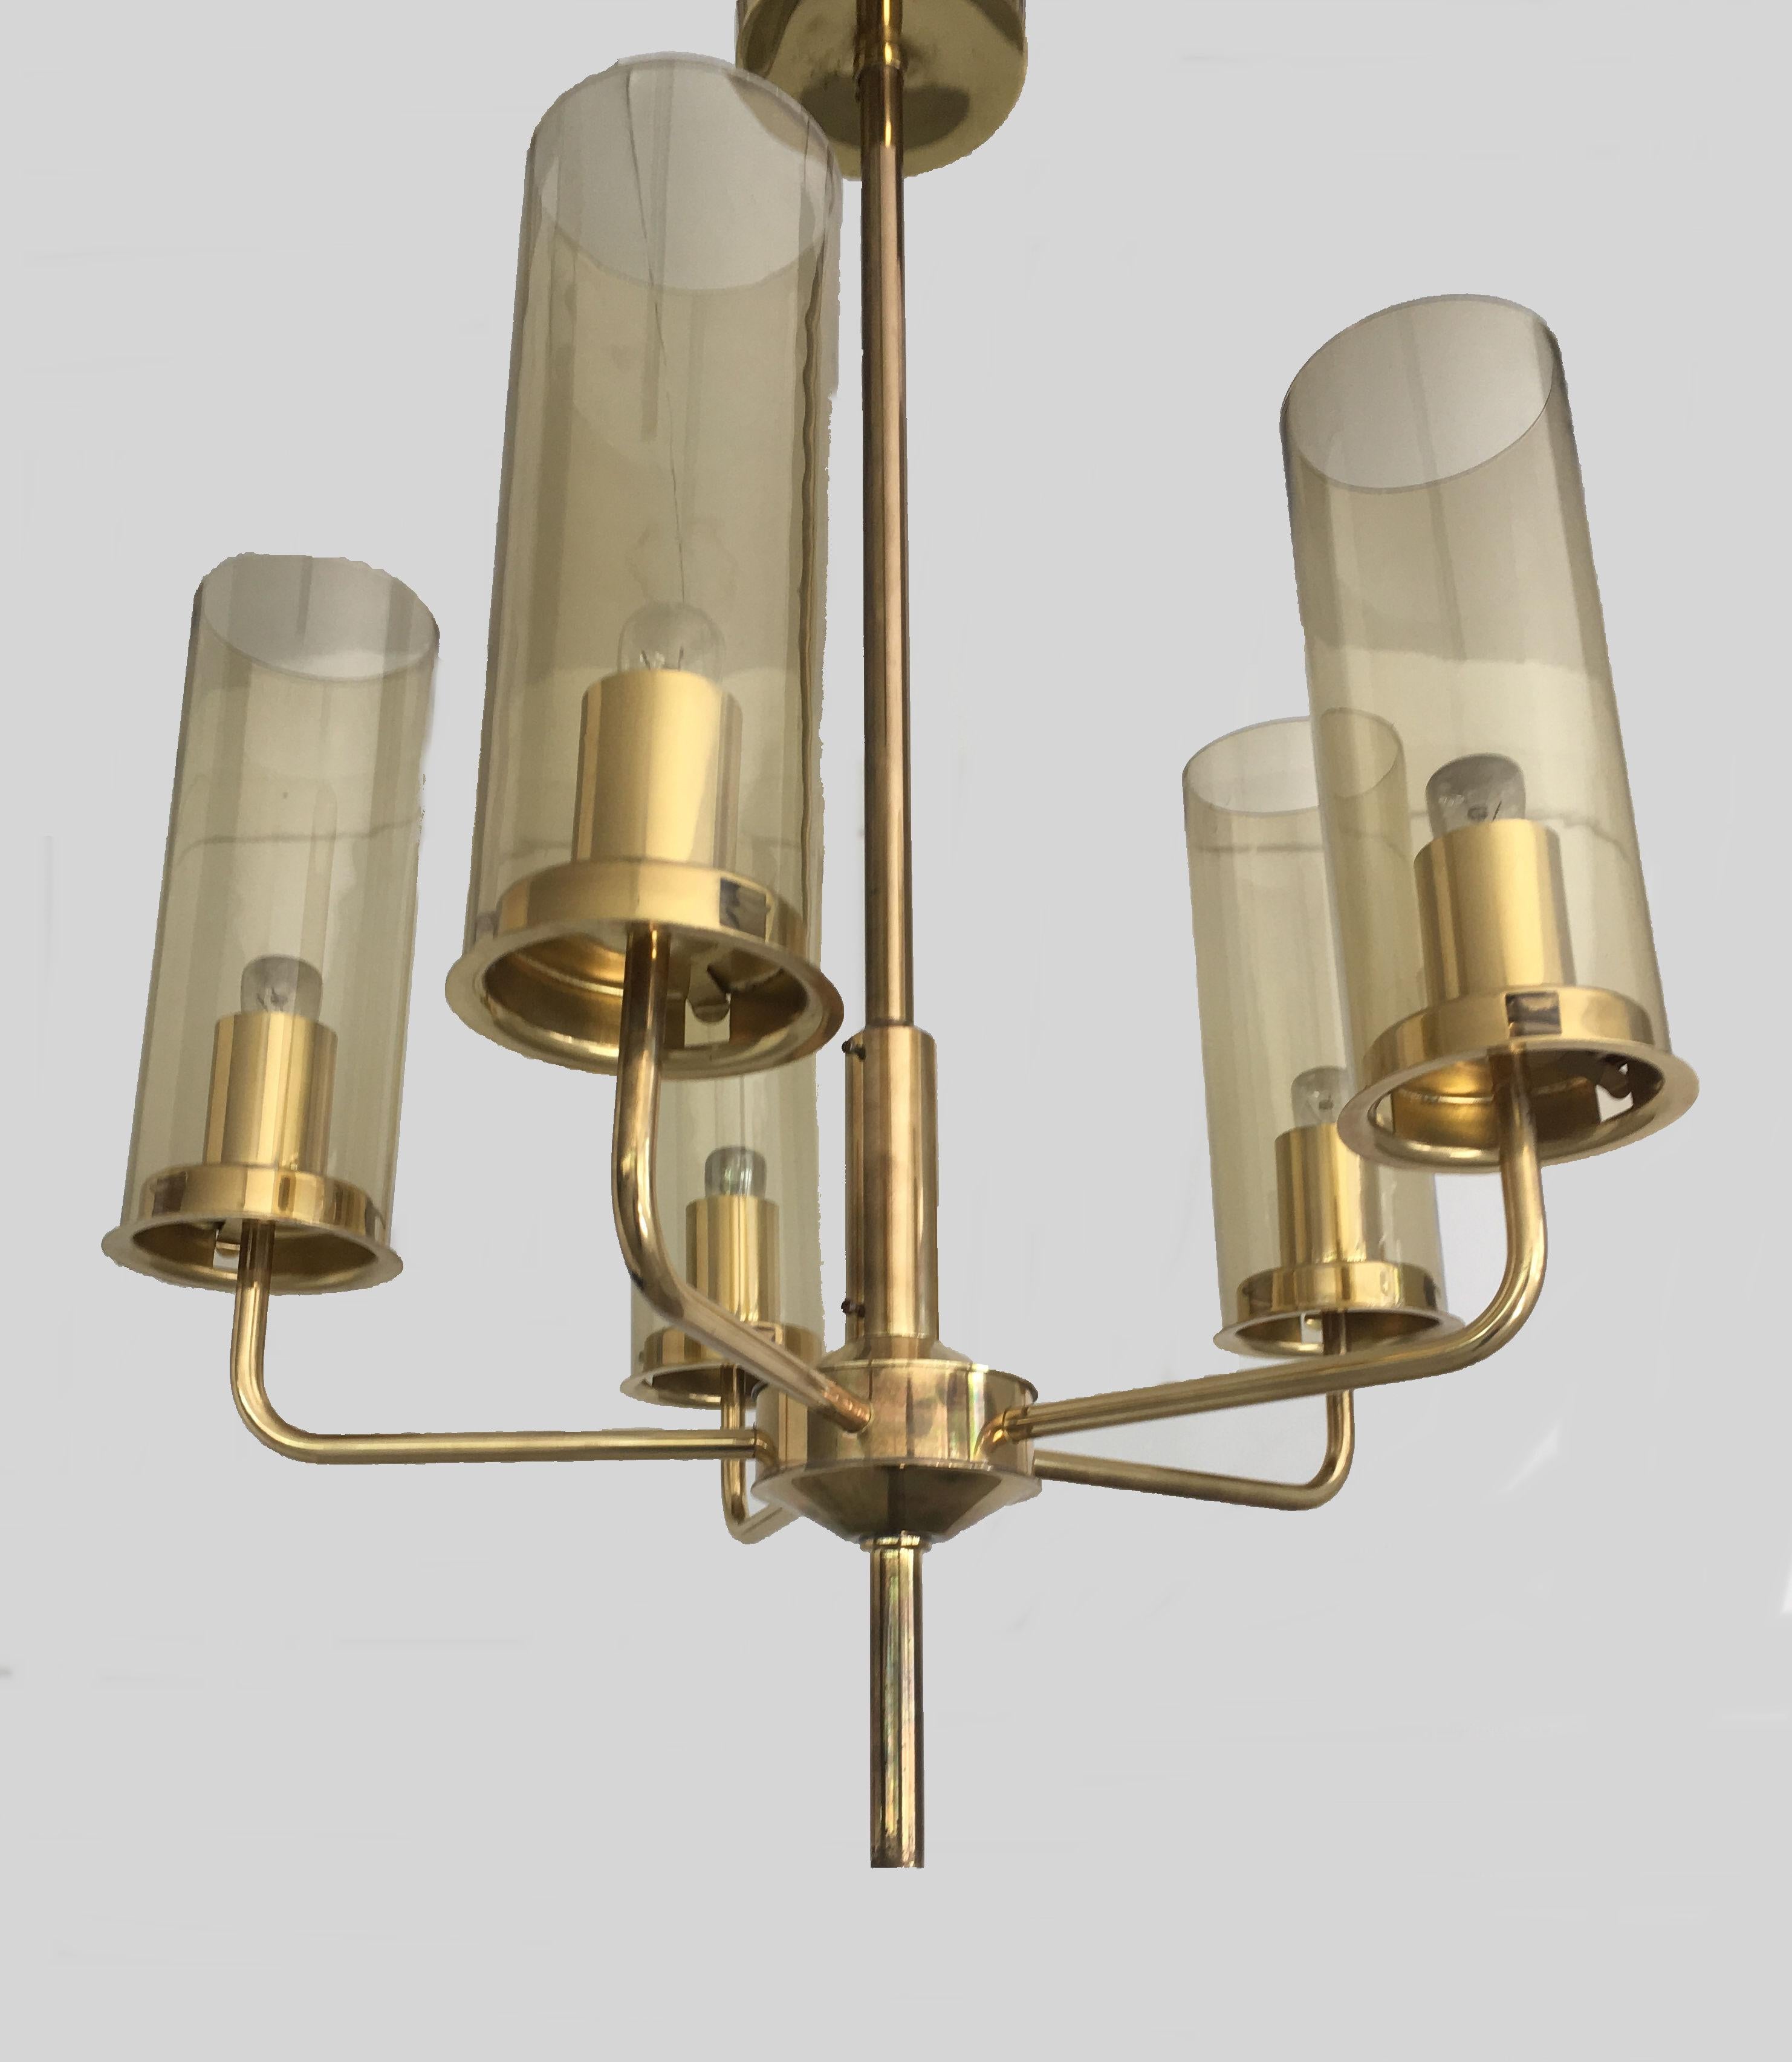 1970s Hans-Agne Jakobsson Swedish brass chandelier in brass AB Markaryd

Brass chandelier with cylinder shaped shades of smoked glass, designed by Hans-Agne Jakobsson produced by AB in Markaryd, Sweden in the late 1960s-early 1970s. 

The